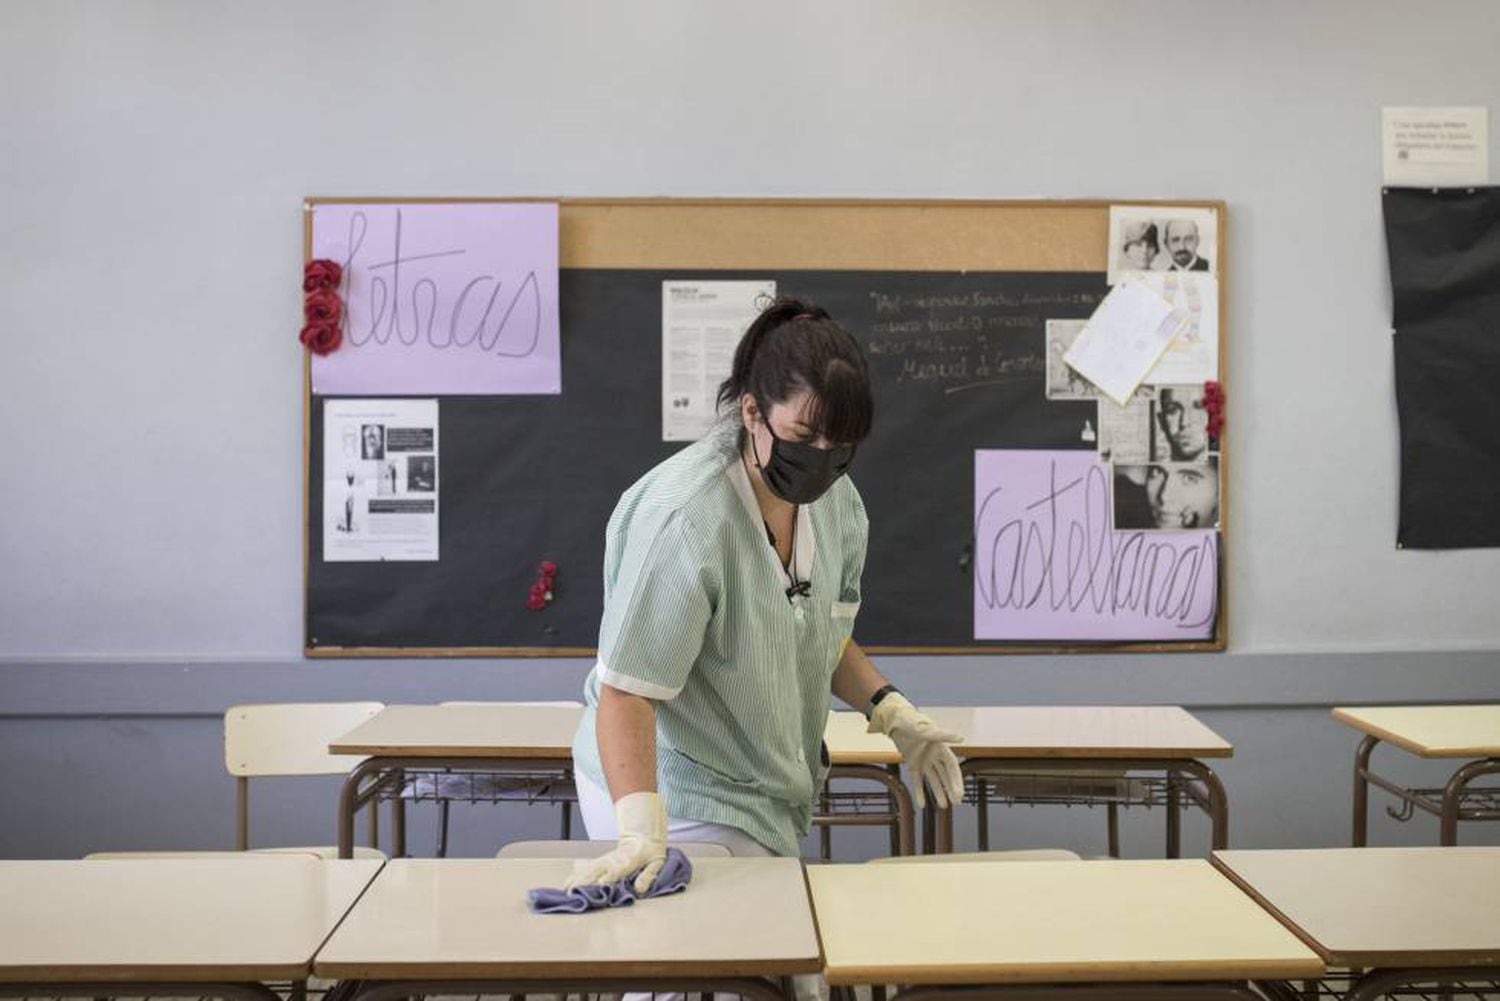 A cleaner wearing a mask prepares a classroom in Barcelona.